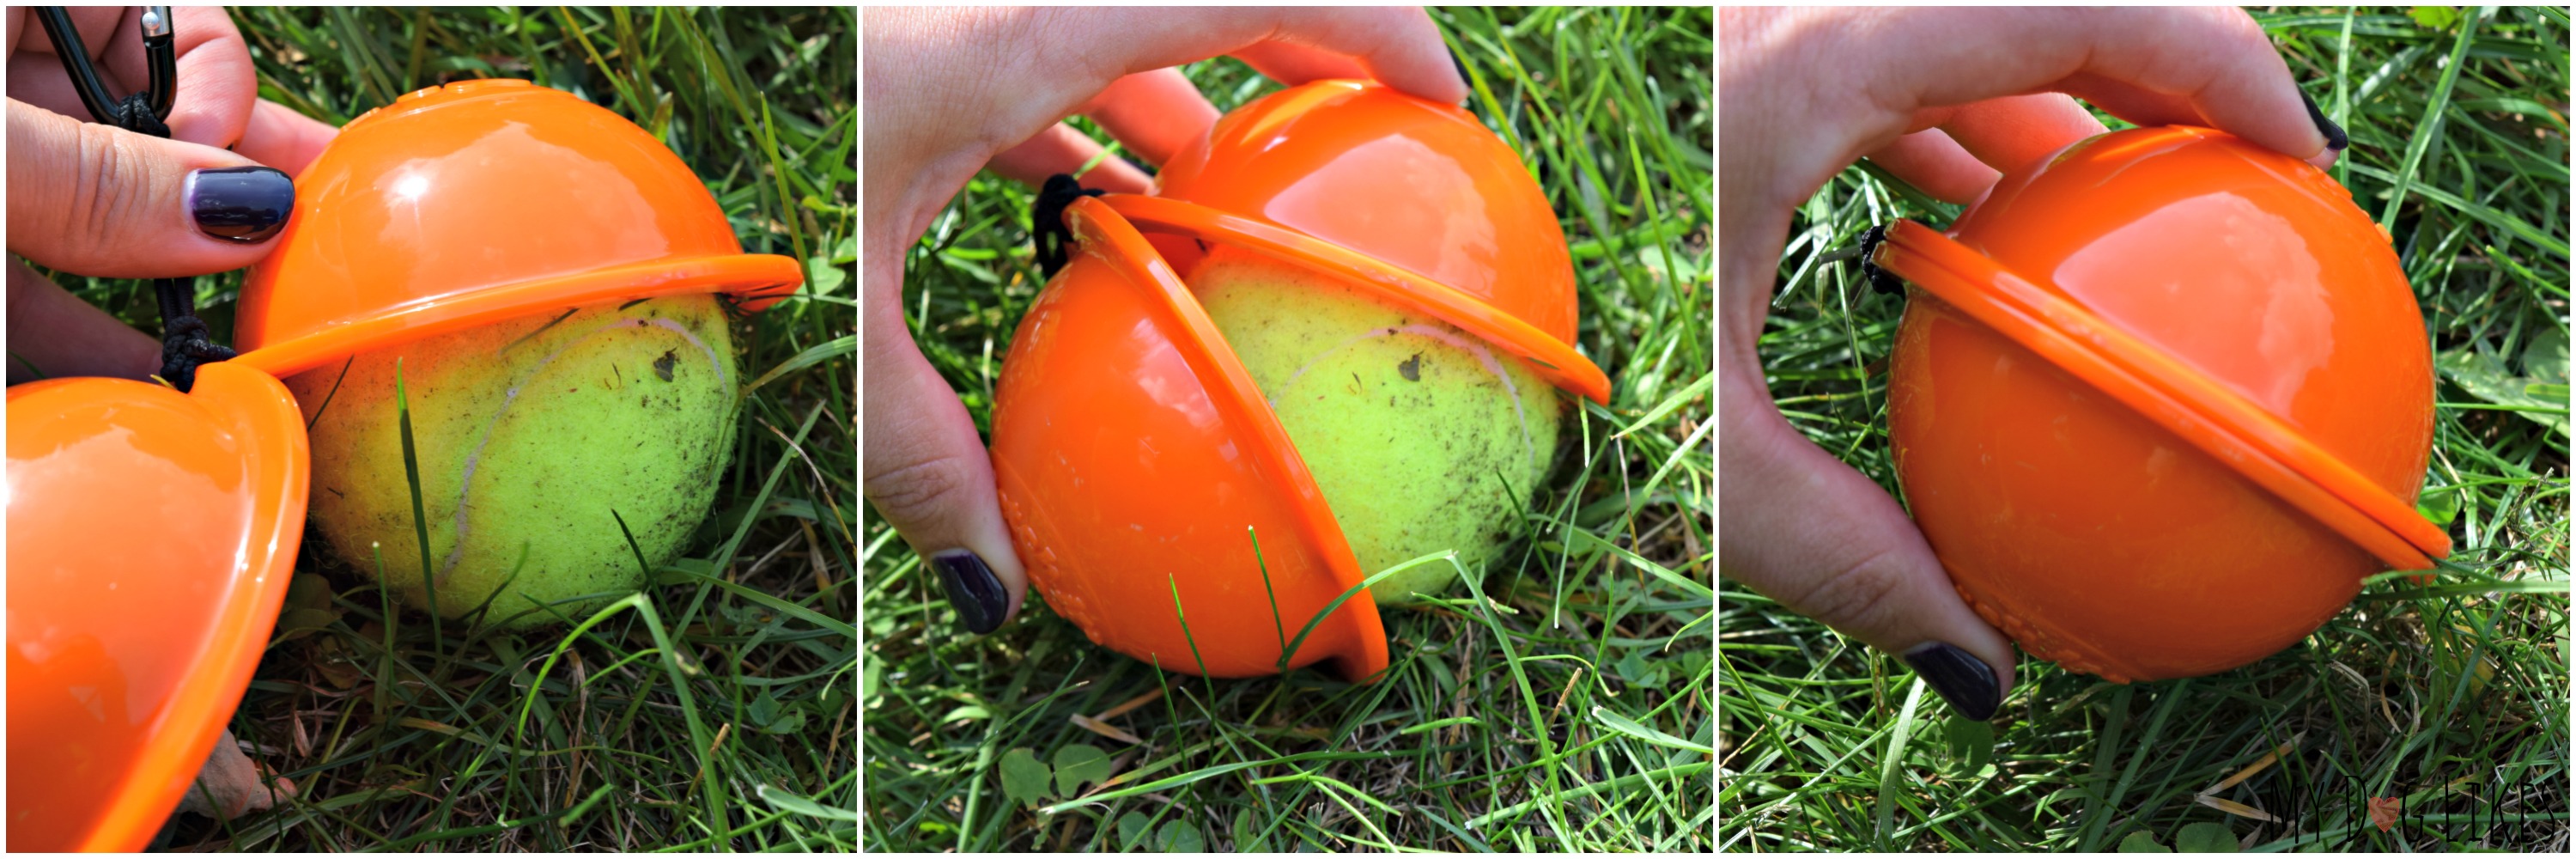 Putting a ball into our Fetch it Tennis Ball Holder